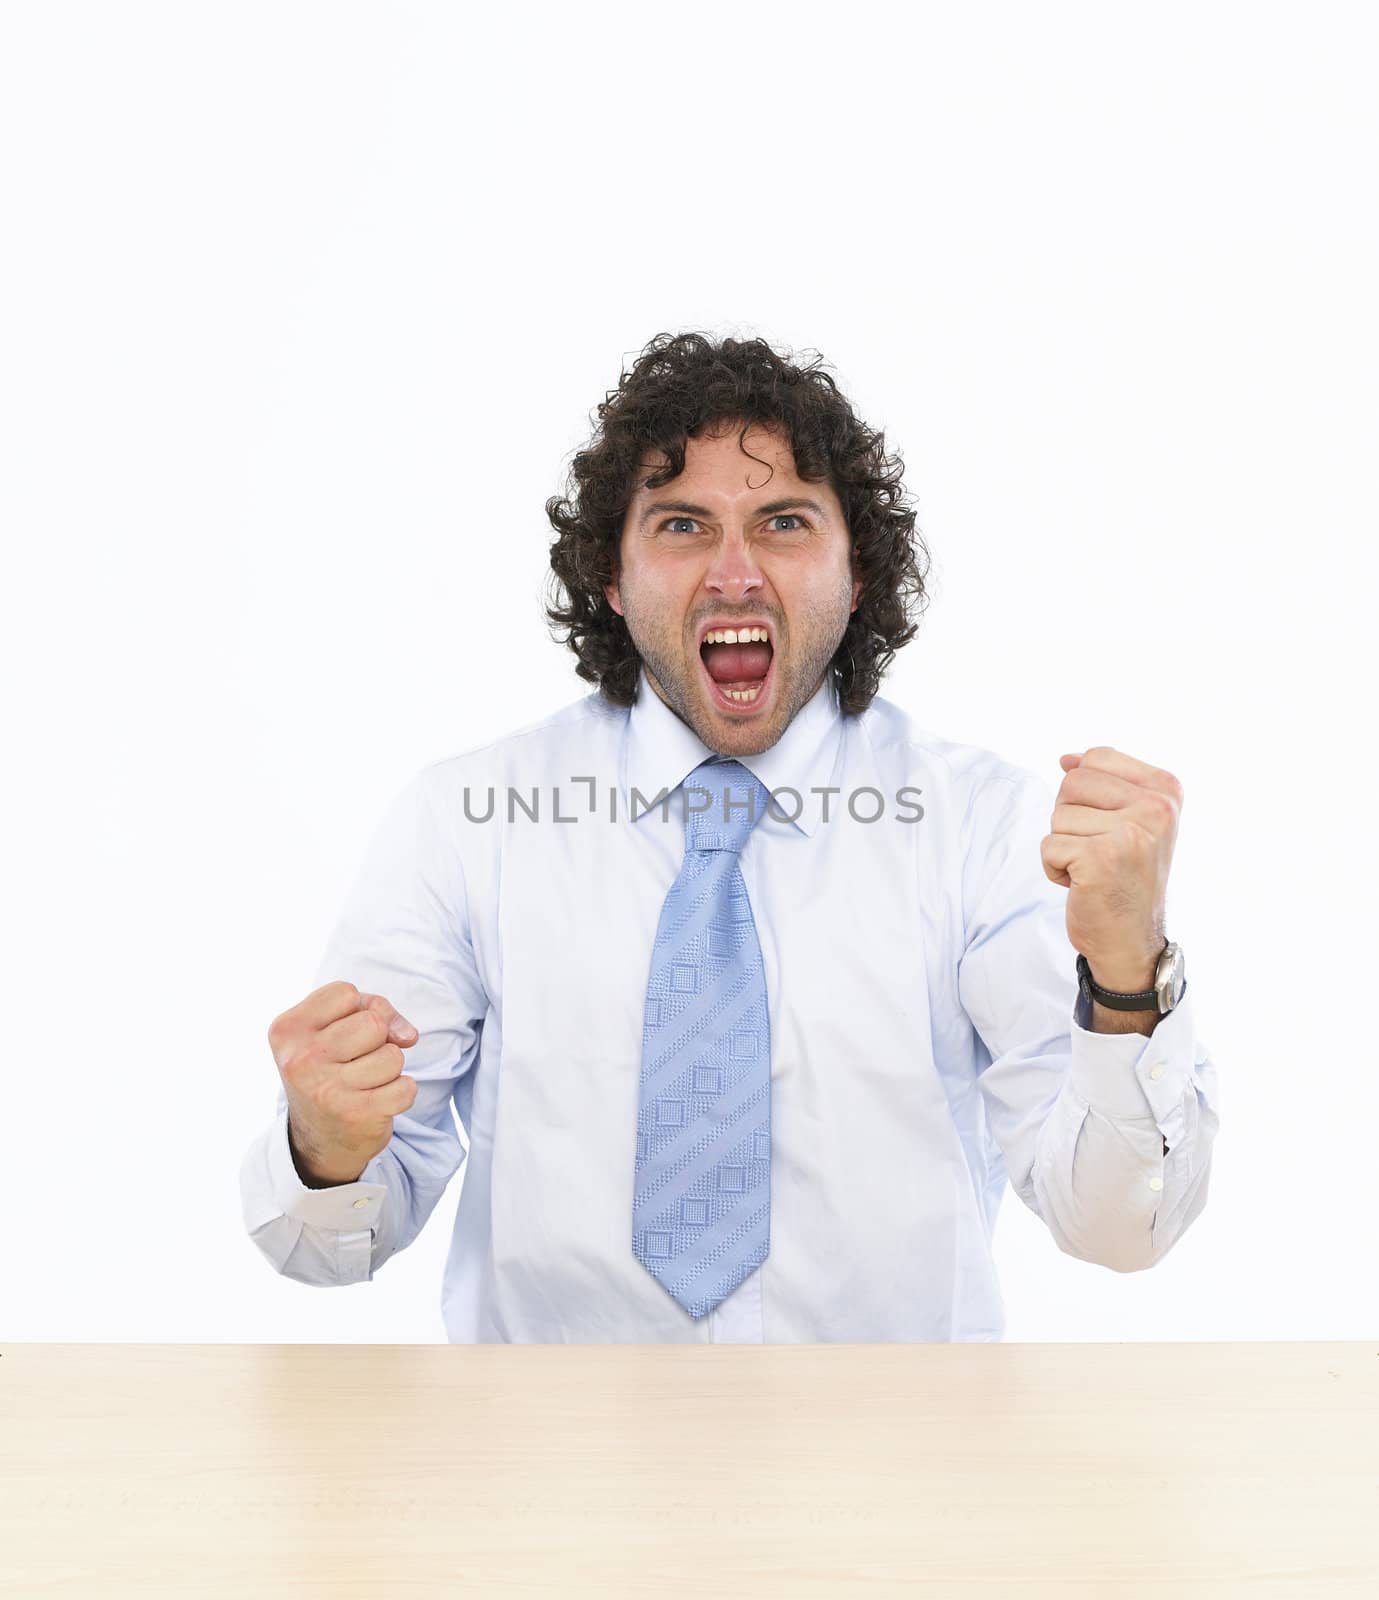 Happy businessman raising his arms sitting at his desk isolated on white background